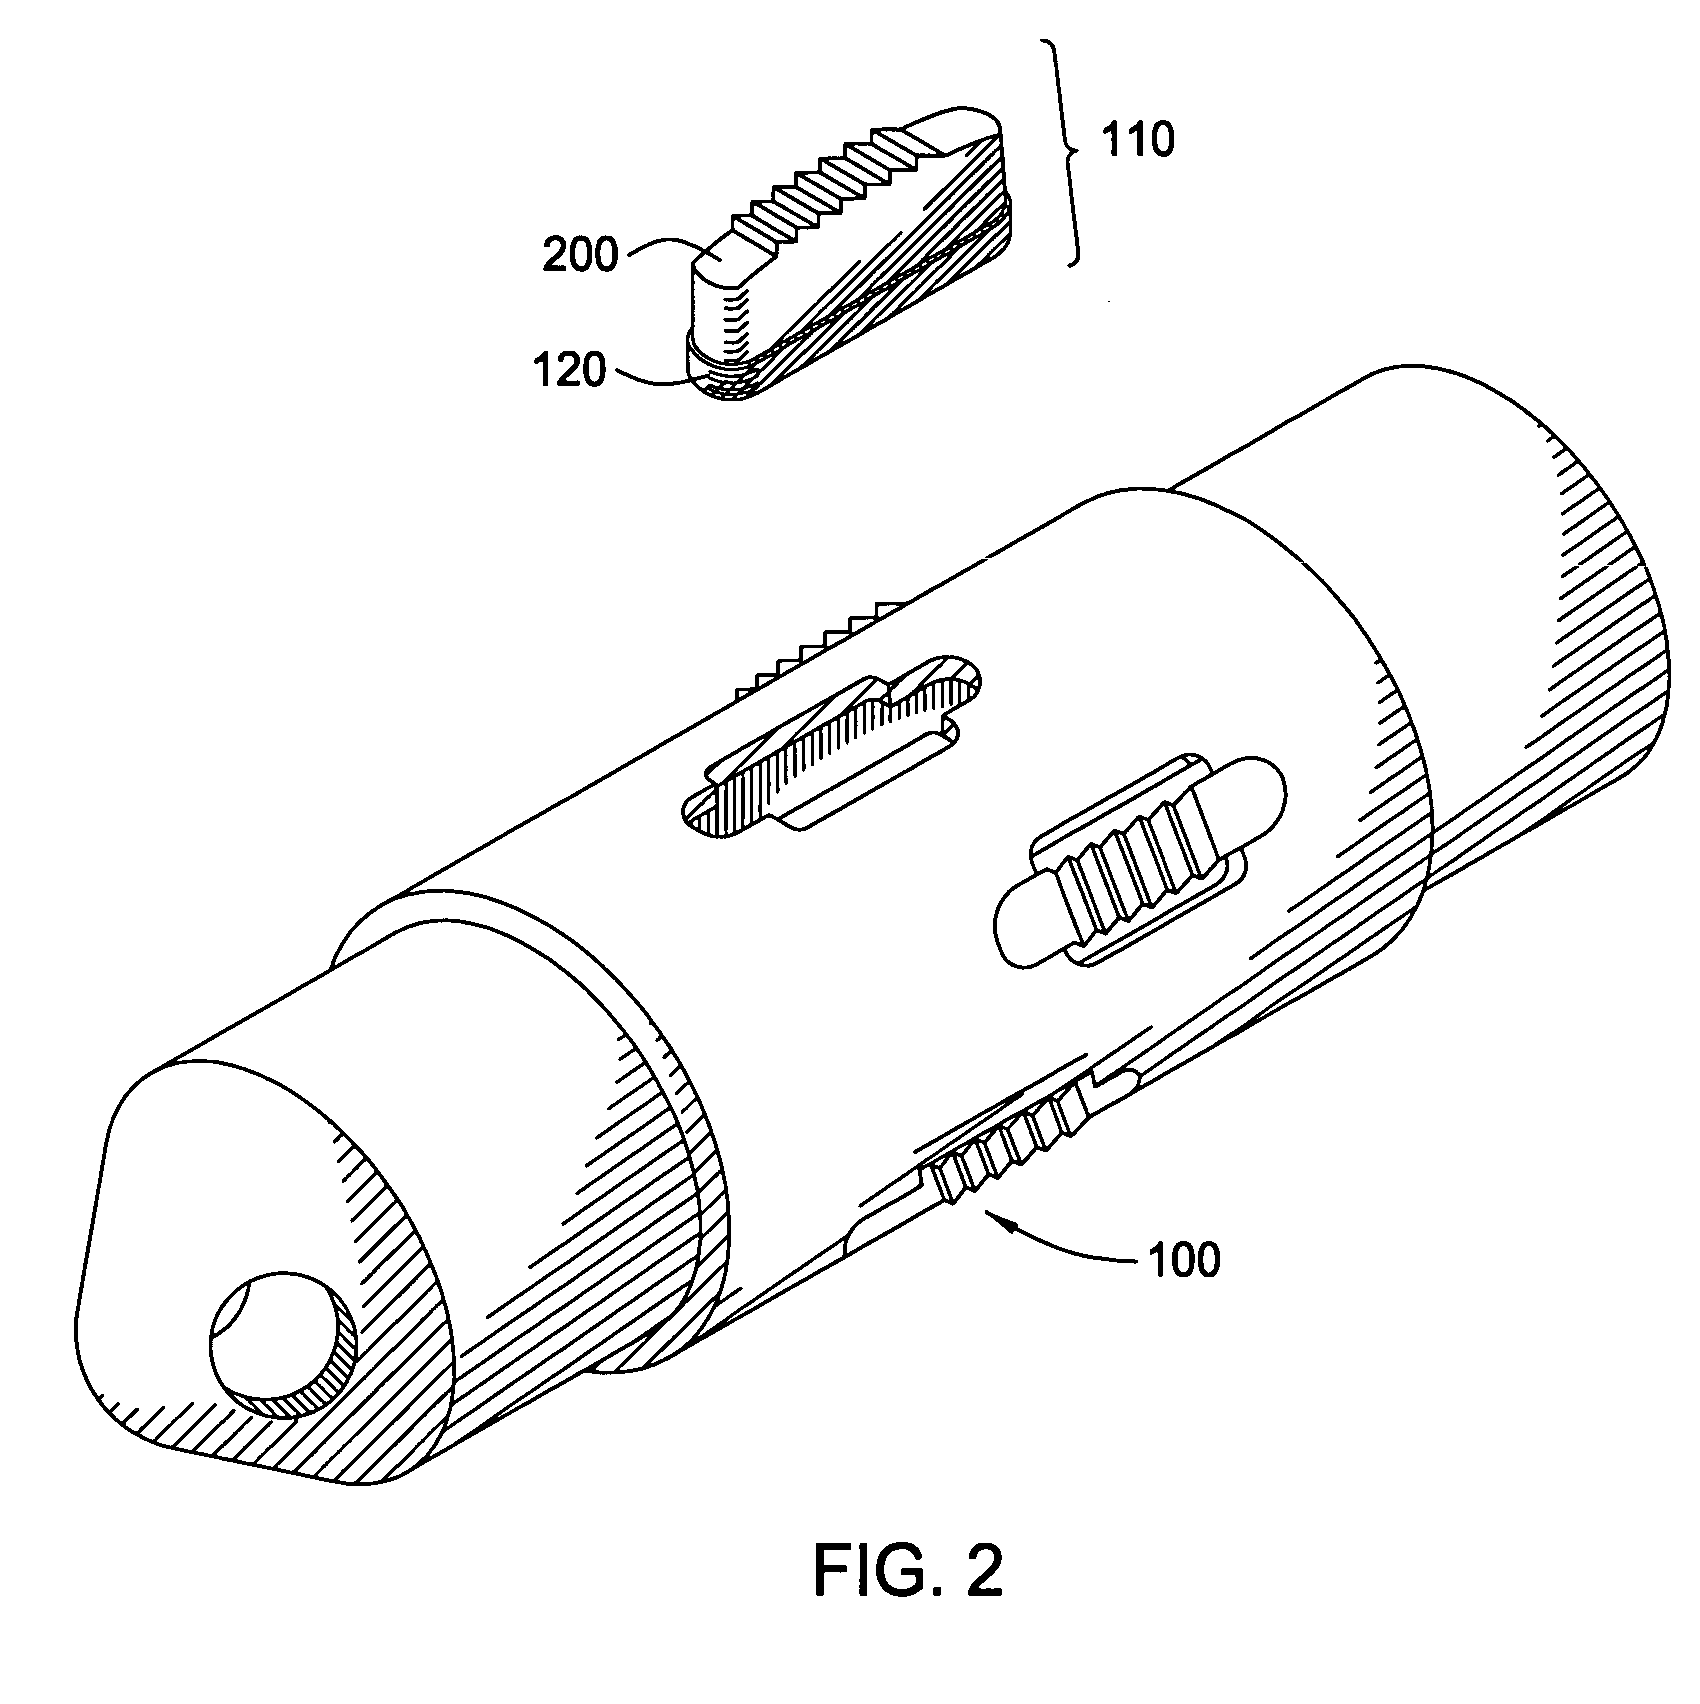 Apparatus and methods of cleaning and refinishing tubulars